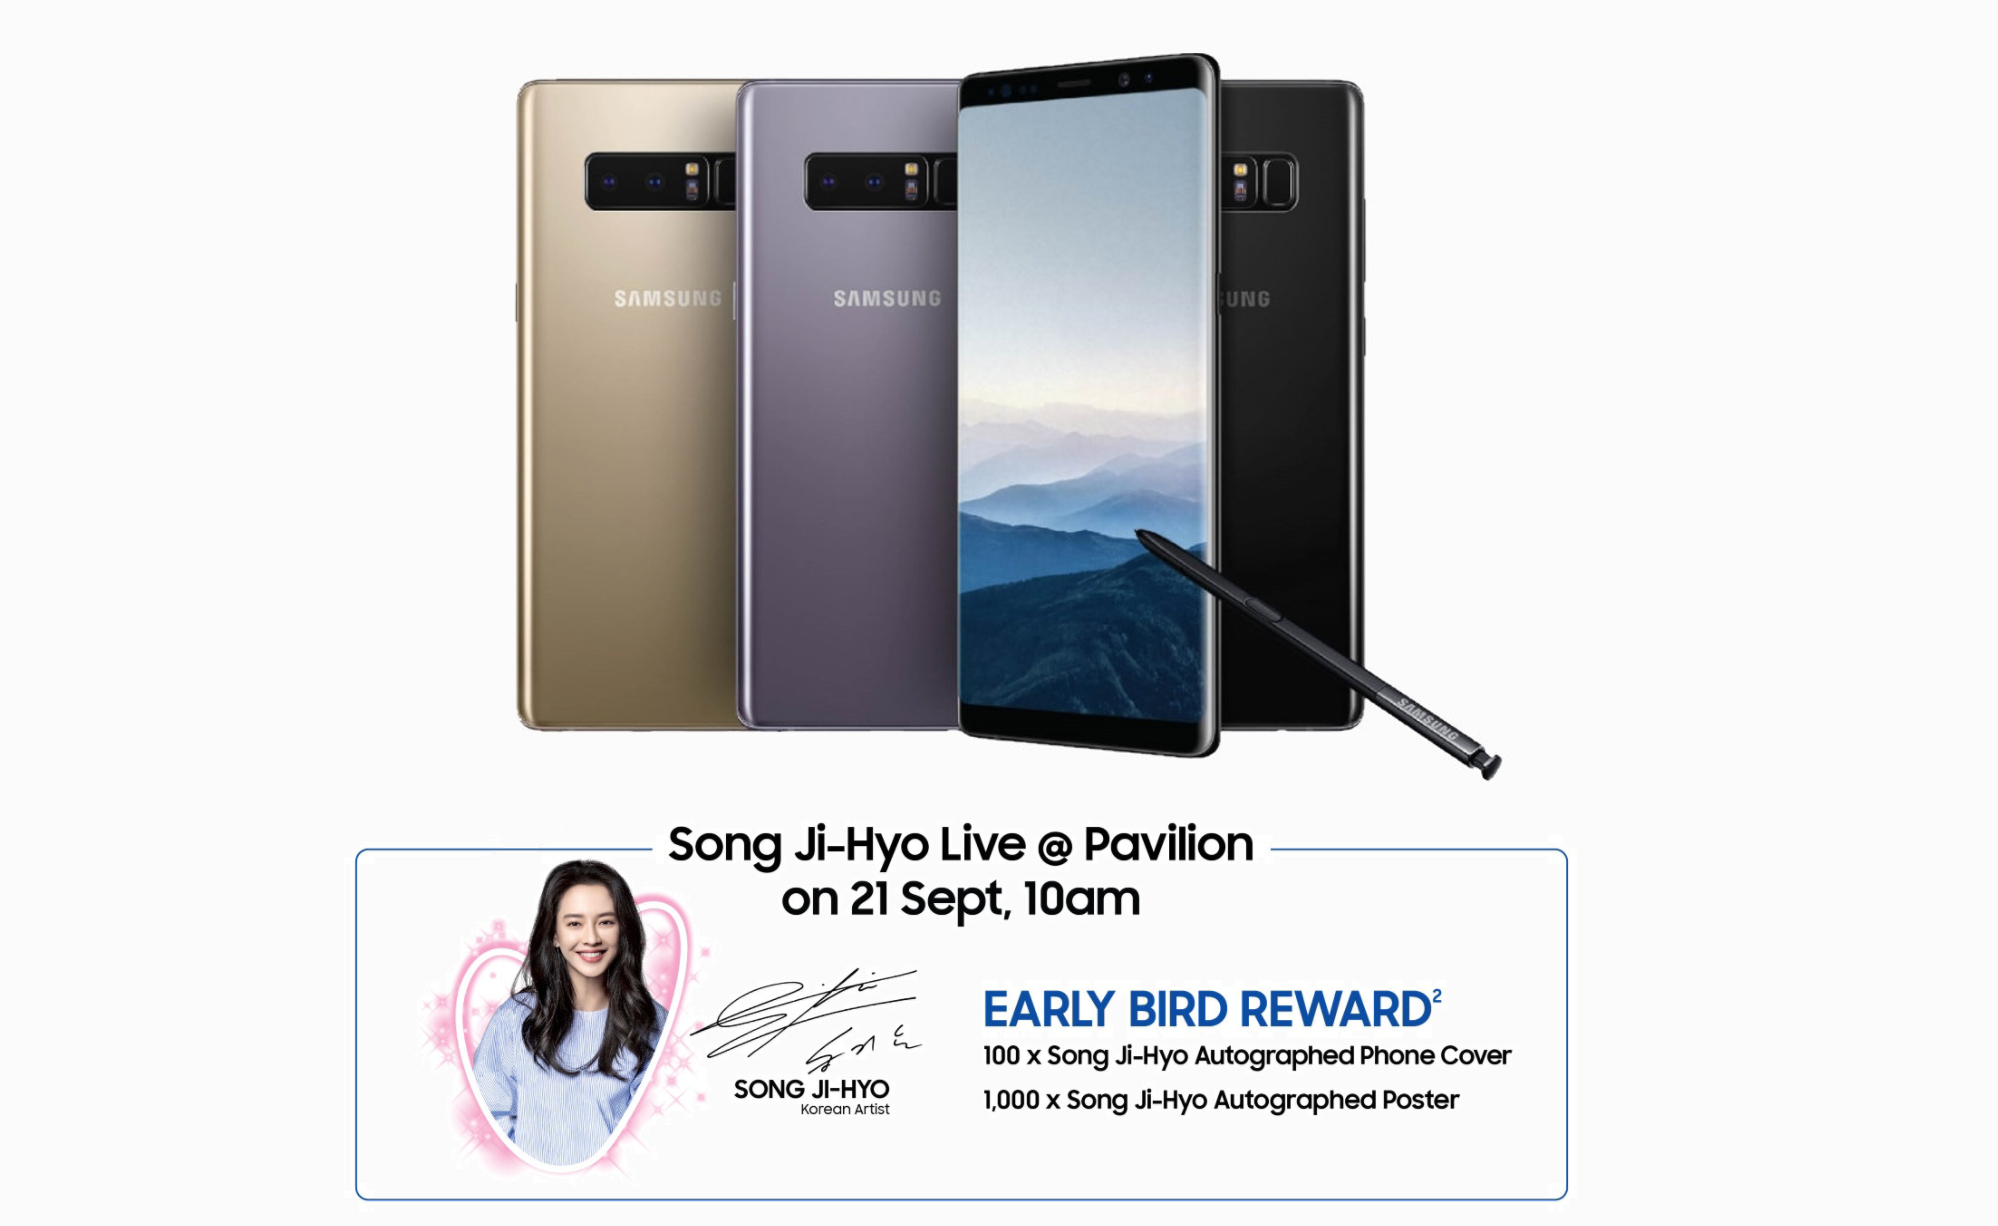 #DoBIGGERThings with Samsung Galaxy Note8 getting rewards and goodies on 21-24 September 2017